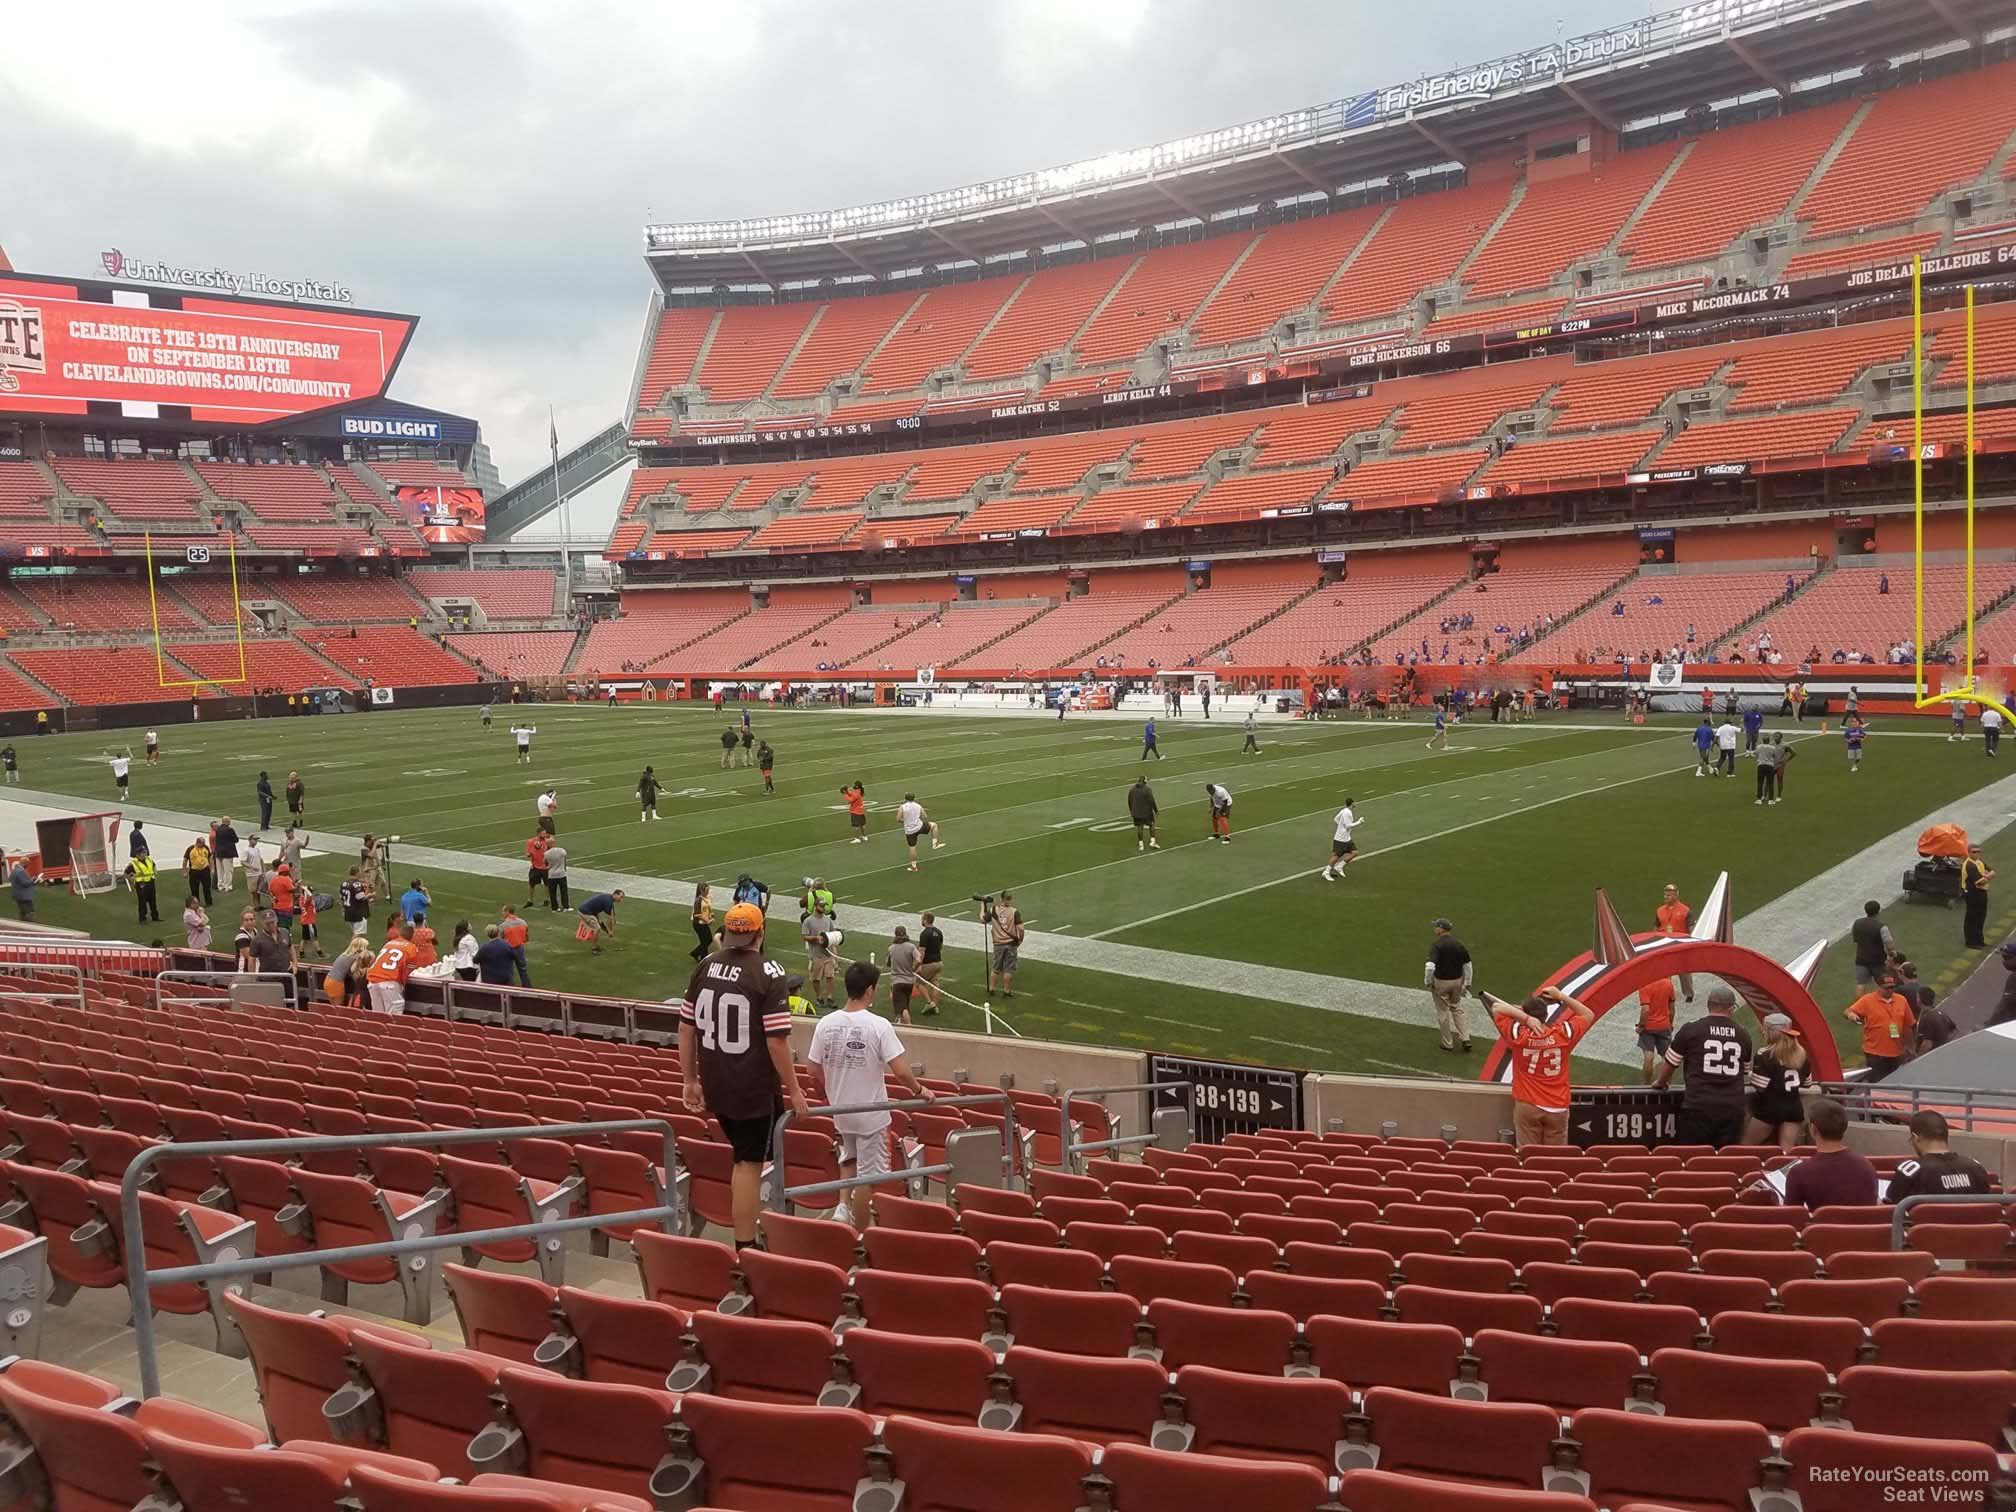 section 139, row 17 seat view  - cleveland browns stadium